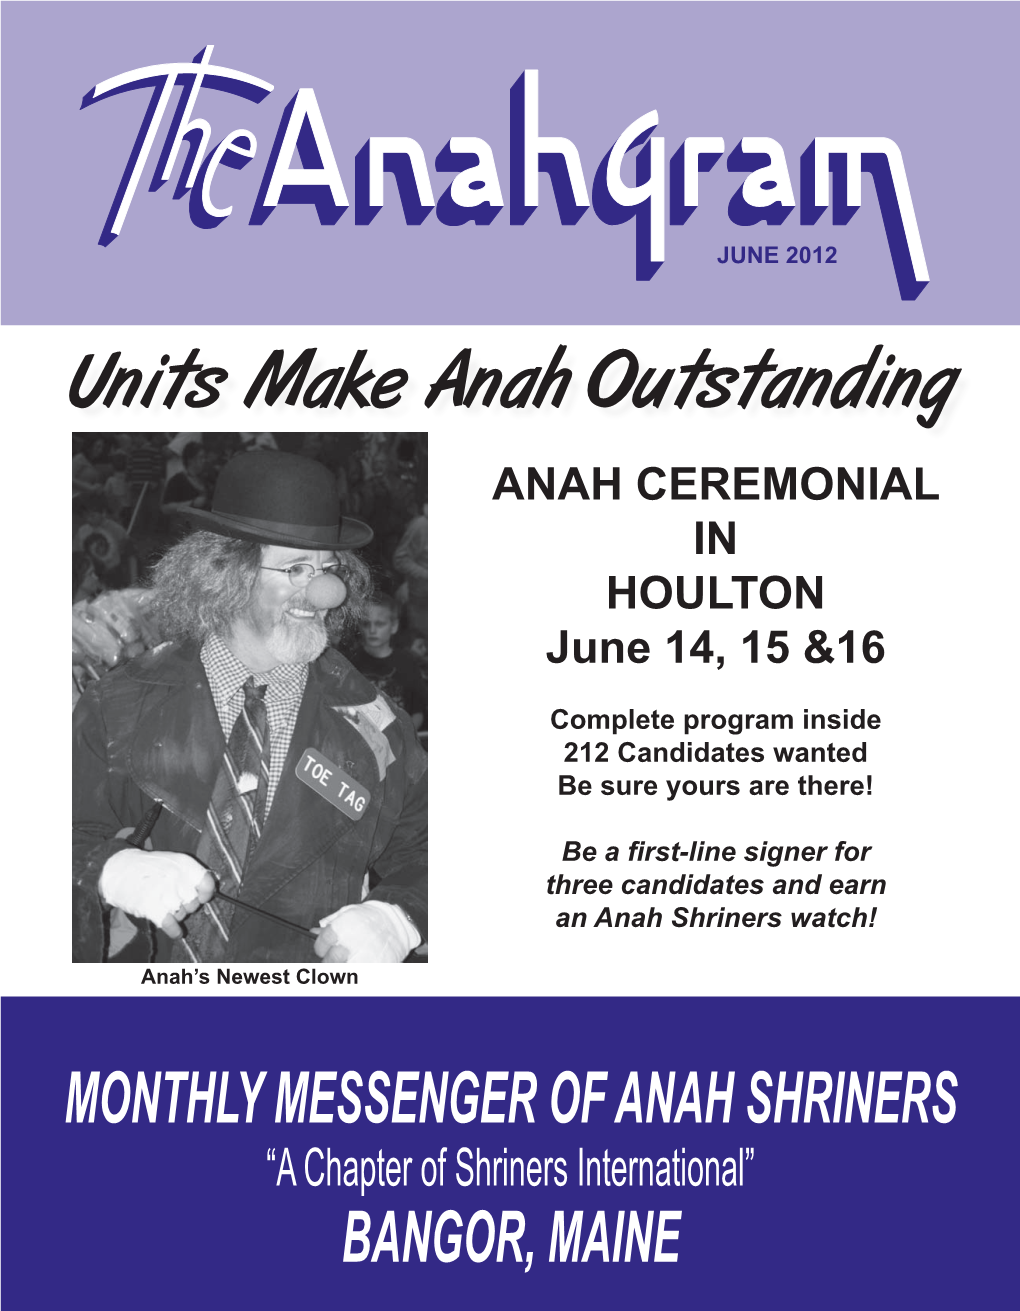 Units Make Anah Outstanding ANAH CEREMONIAL in HOULTON June 14, 15 &16